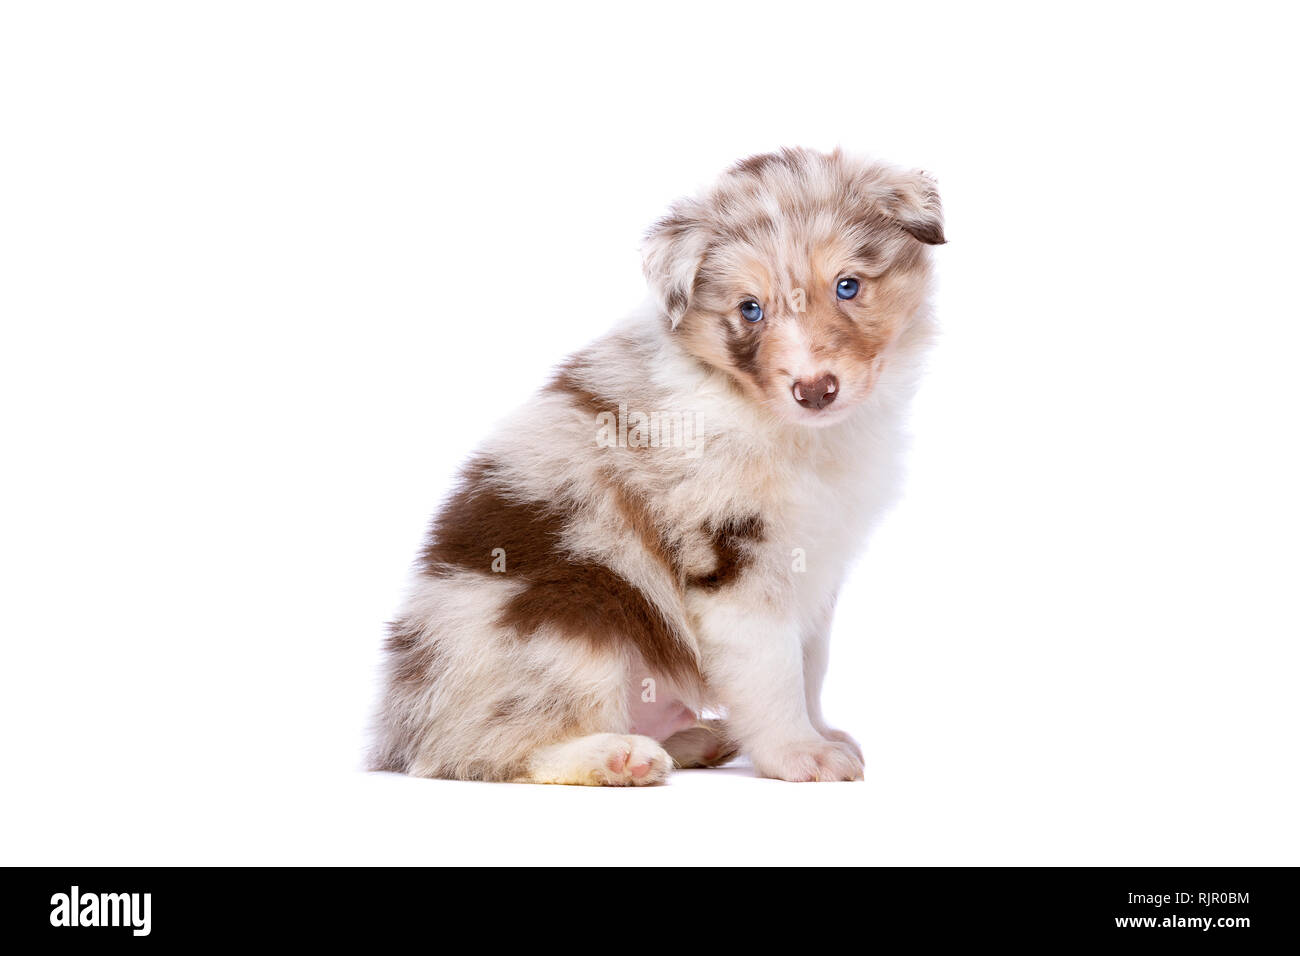 Red Merle Border Collie High Resolution Stock Photography and Images - Alamy